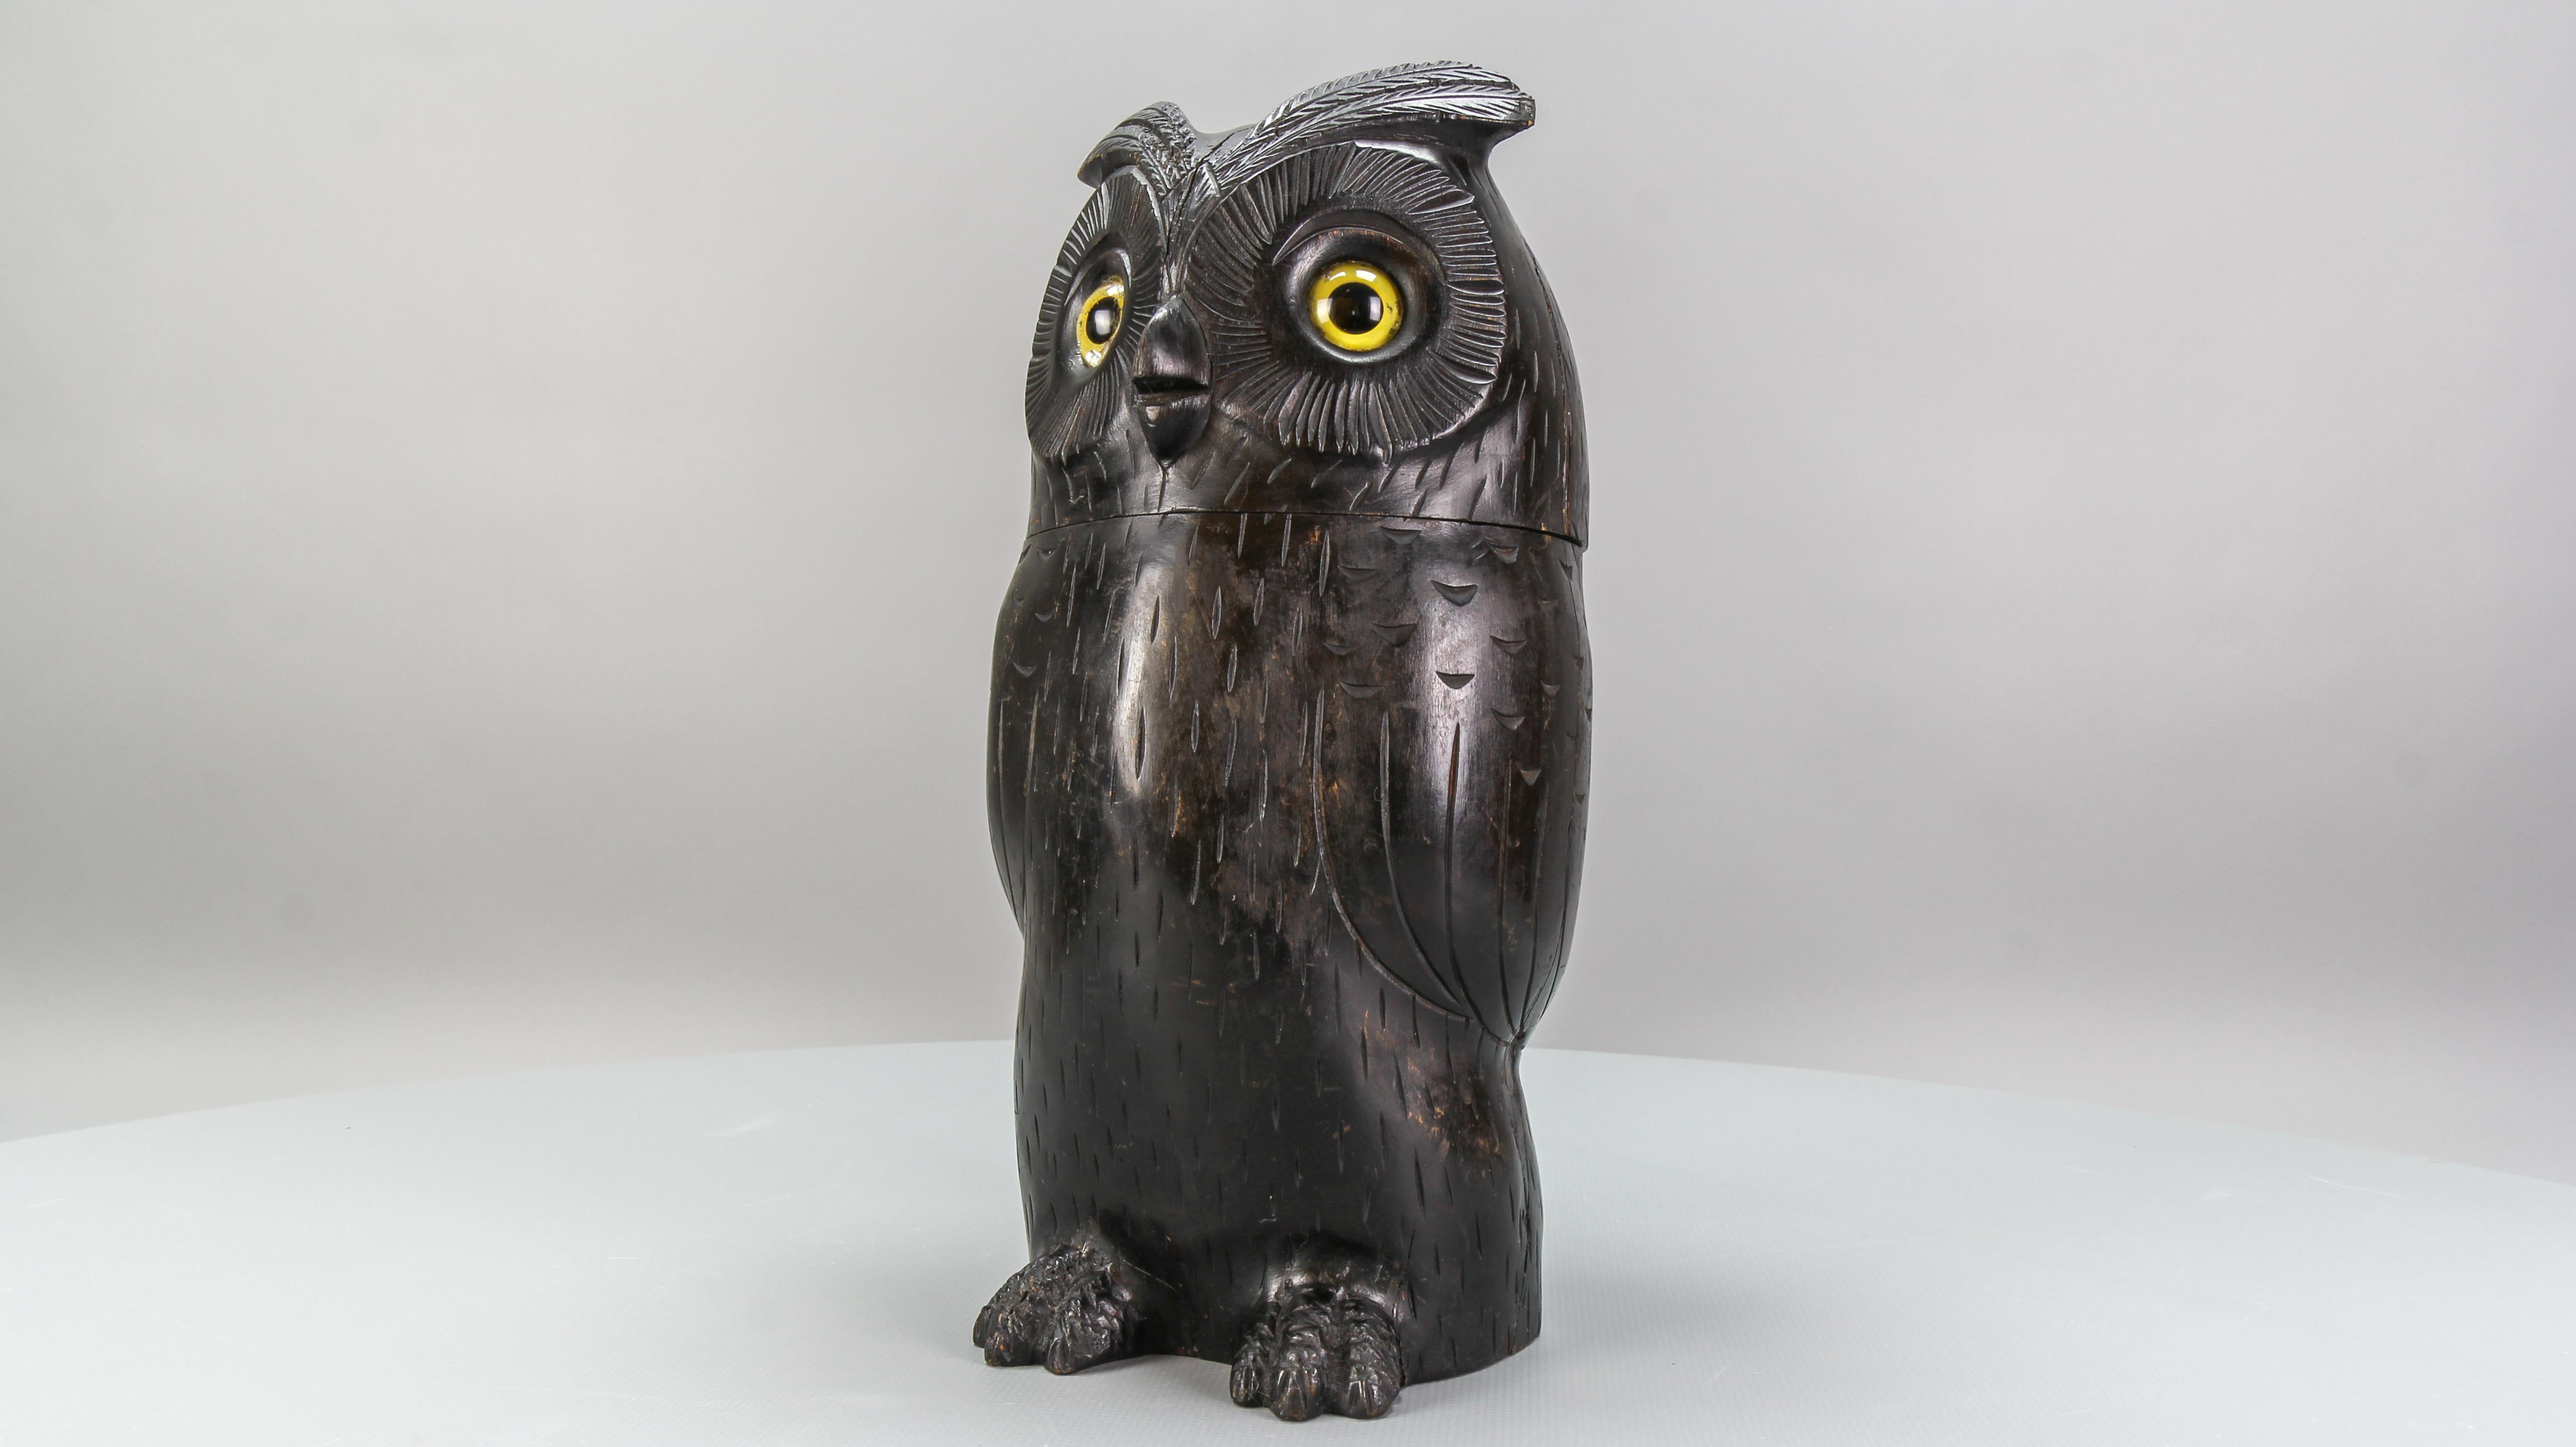 Antique Black Forest Style Wooden Carved Trinket Box or Bucket Owl, circa 1920 For Sale 11